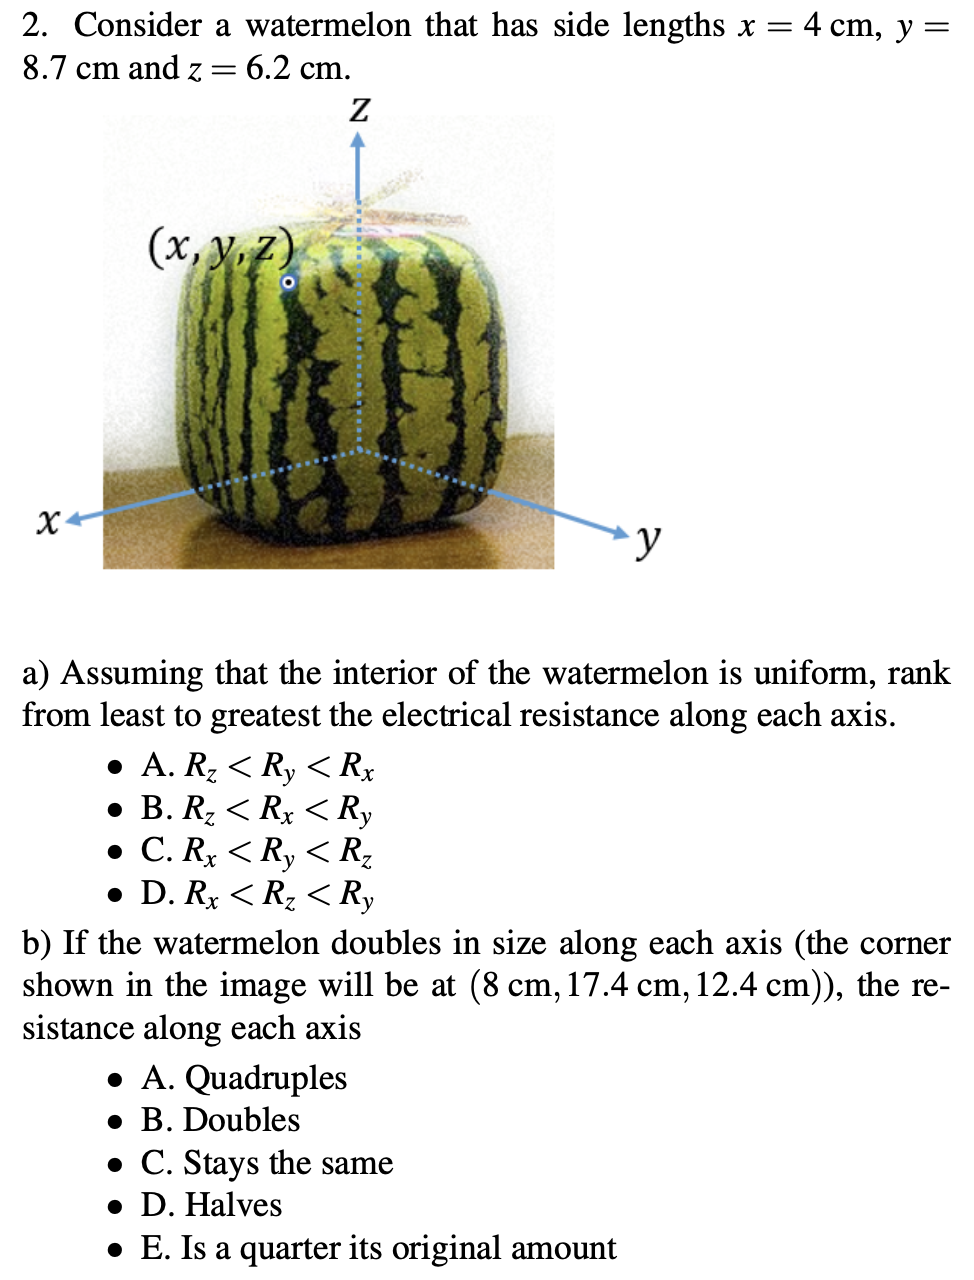 2. Consider a watermelon that has side lengths x =
- 4 cm, у —
8.7 cm and z=
= 6.2 cm.
Z
(x, y7)
a) Assuming that the interior of the watermelon is uniform, rank
from least to greatest the electrical resistance along each axis.
• A. R2 < Ry < Rx
• B. Rz < Rx < Ry
• C. Rx < Ry < Rz
• D. Rx < Rz < Ry
b) If the watermelon doubles in size along each axis (the corner
shown in the image will be at (8 cm, 17.4 cm, 12.4 cm)), the re-
sistance along each axis
• A. Quadruples
• B. Doubles
• C. Stays the same
• D. Halves
• E. Is a quarter its original amount
